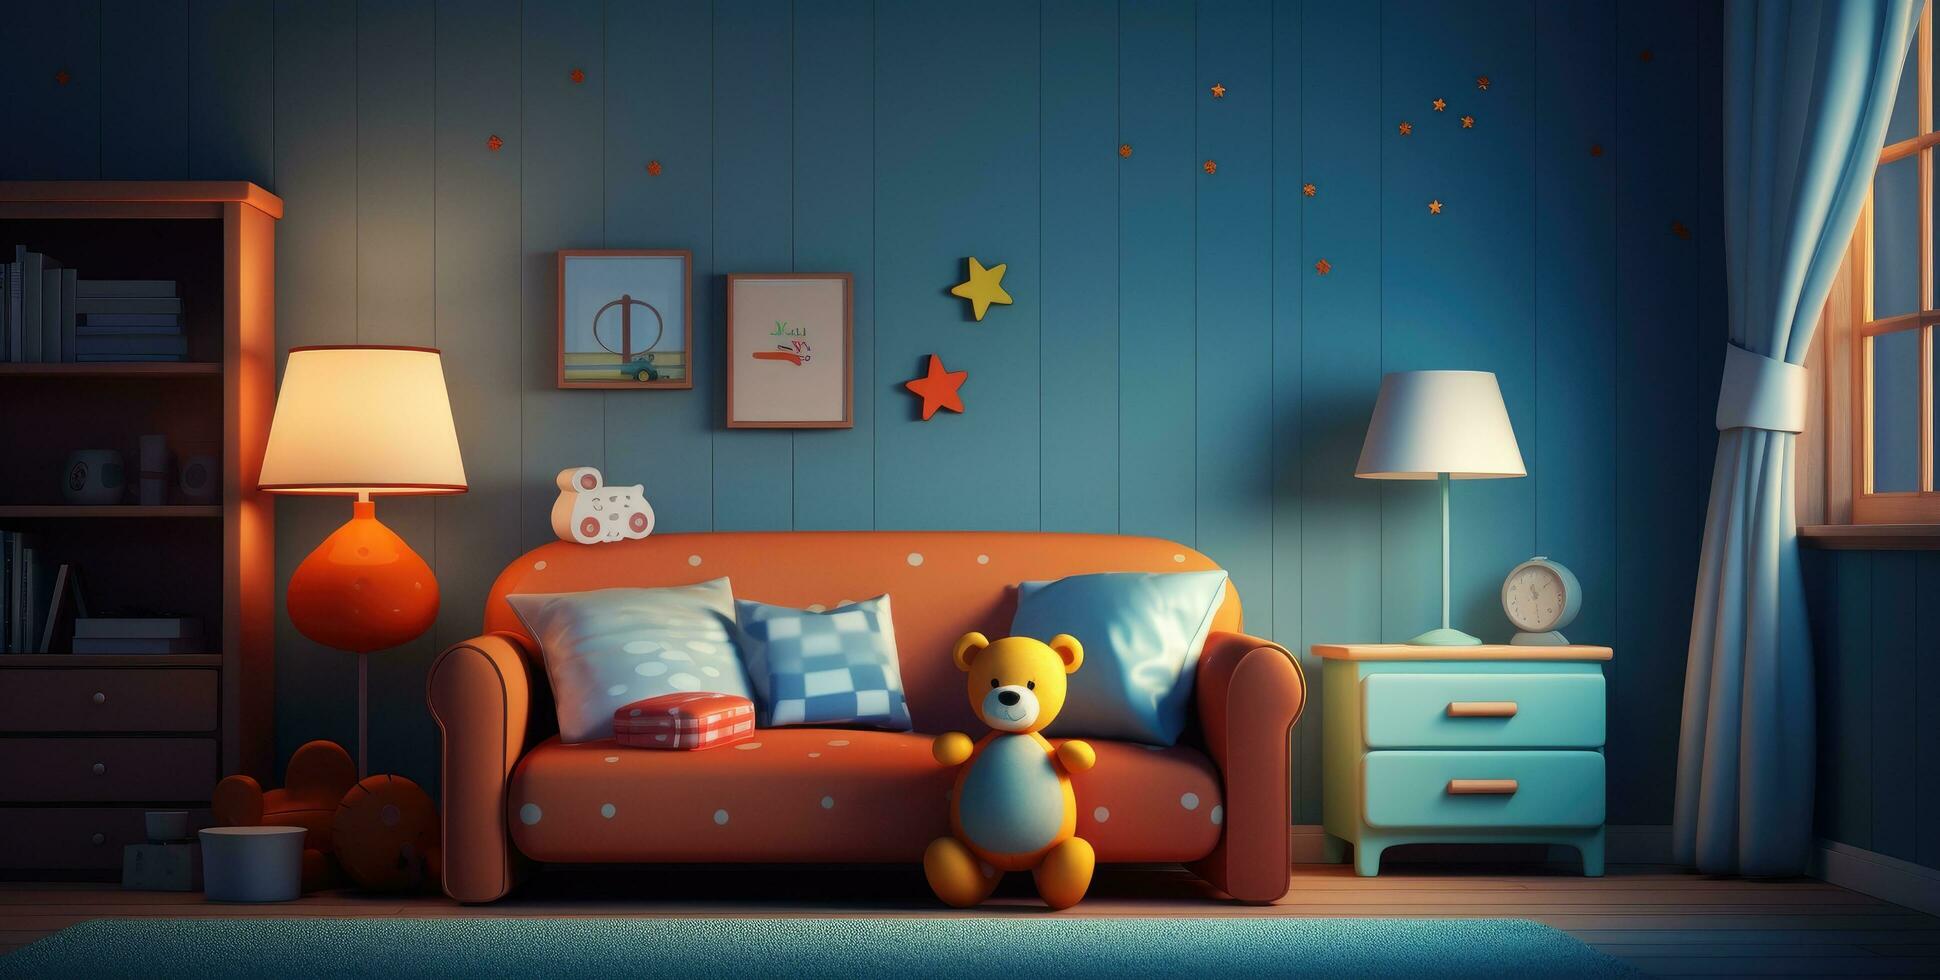 AI generated a baby's room with a toy on the sofa and teddy bear in the background photo